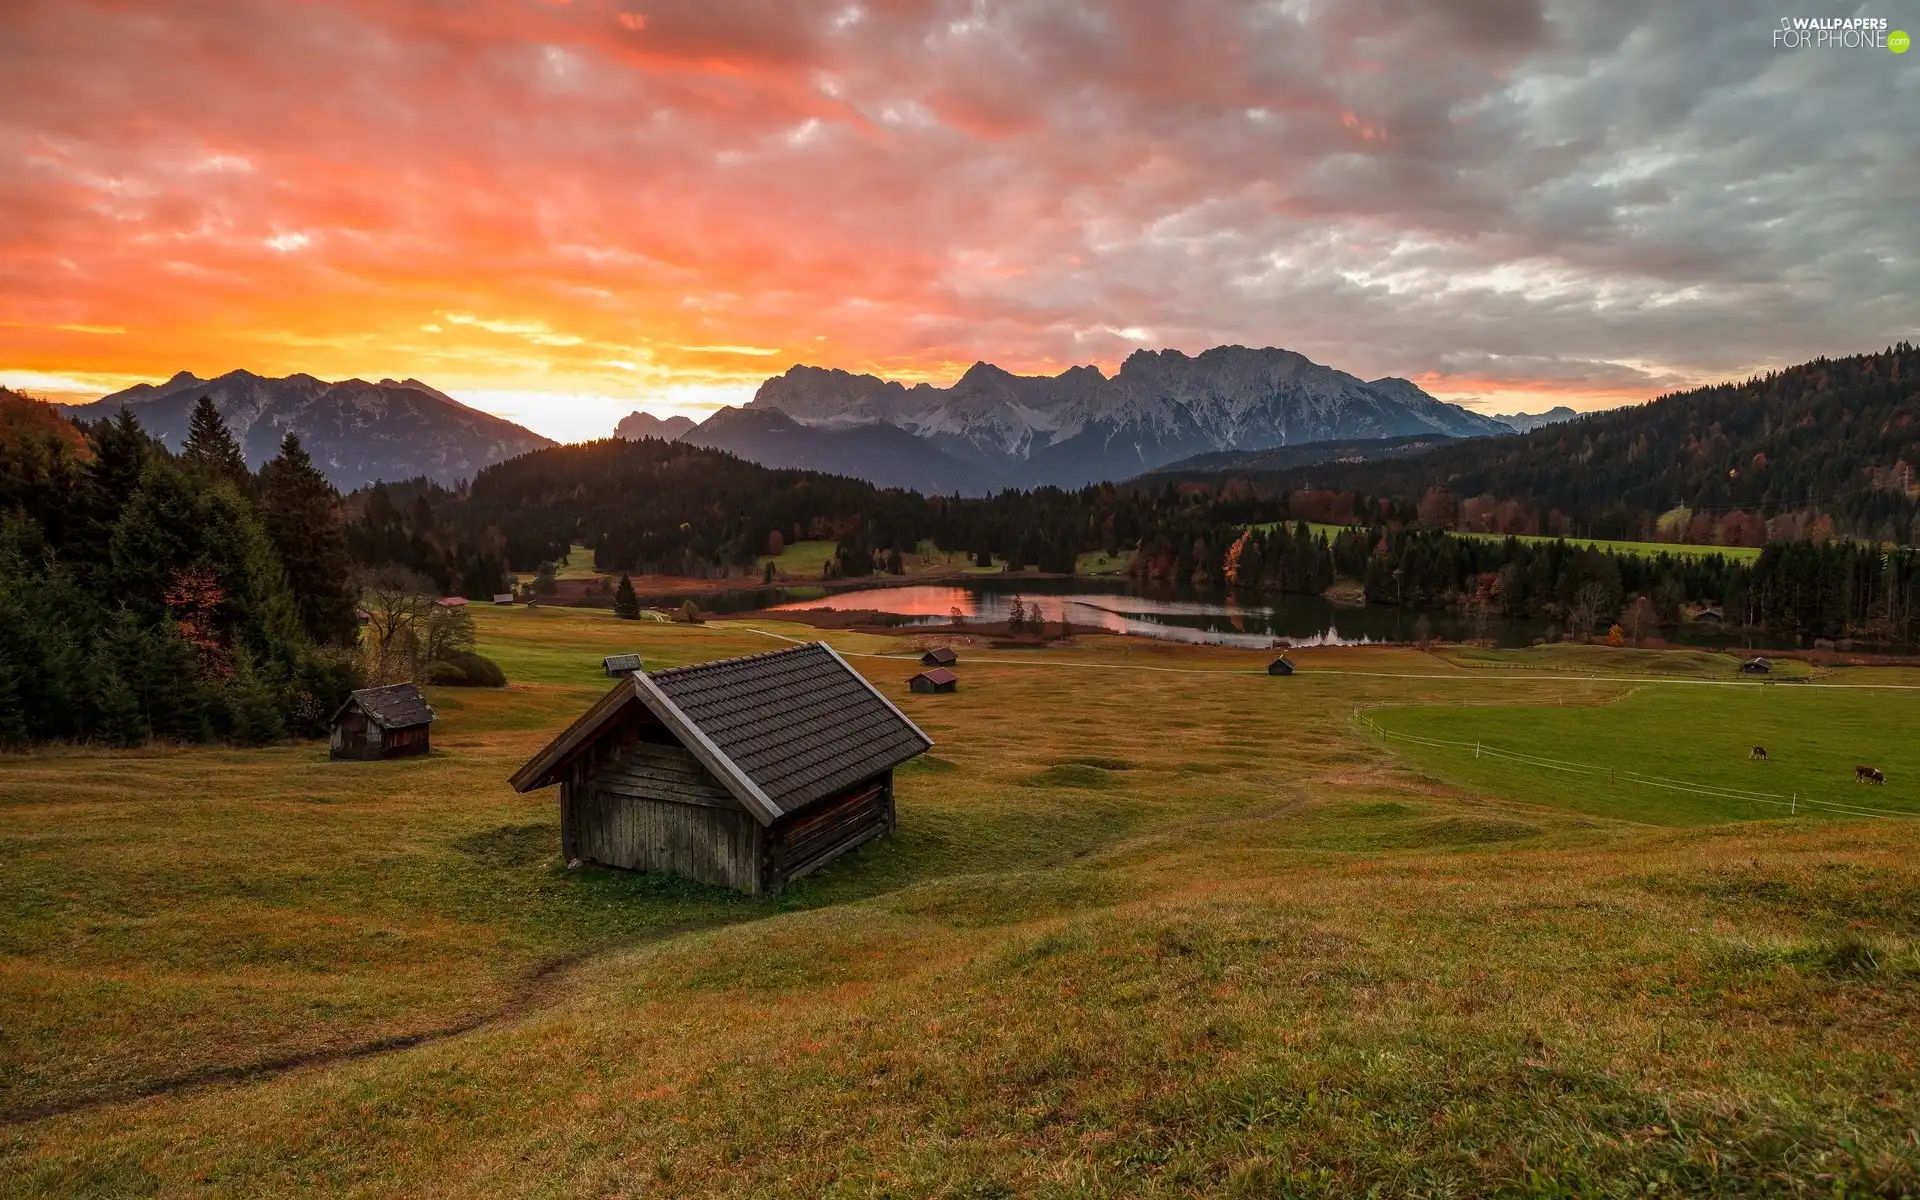 clouds, car in the meadow, Great Sunsets, viewes, trees, Bavaria, Houses, Karwendel Mountains, Germany, Sheds, woods, Geroldsee Lake